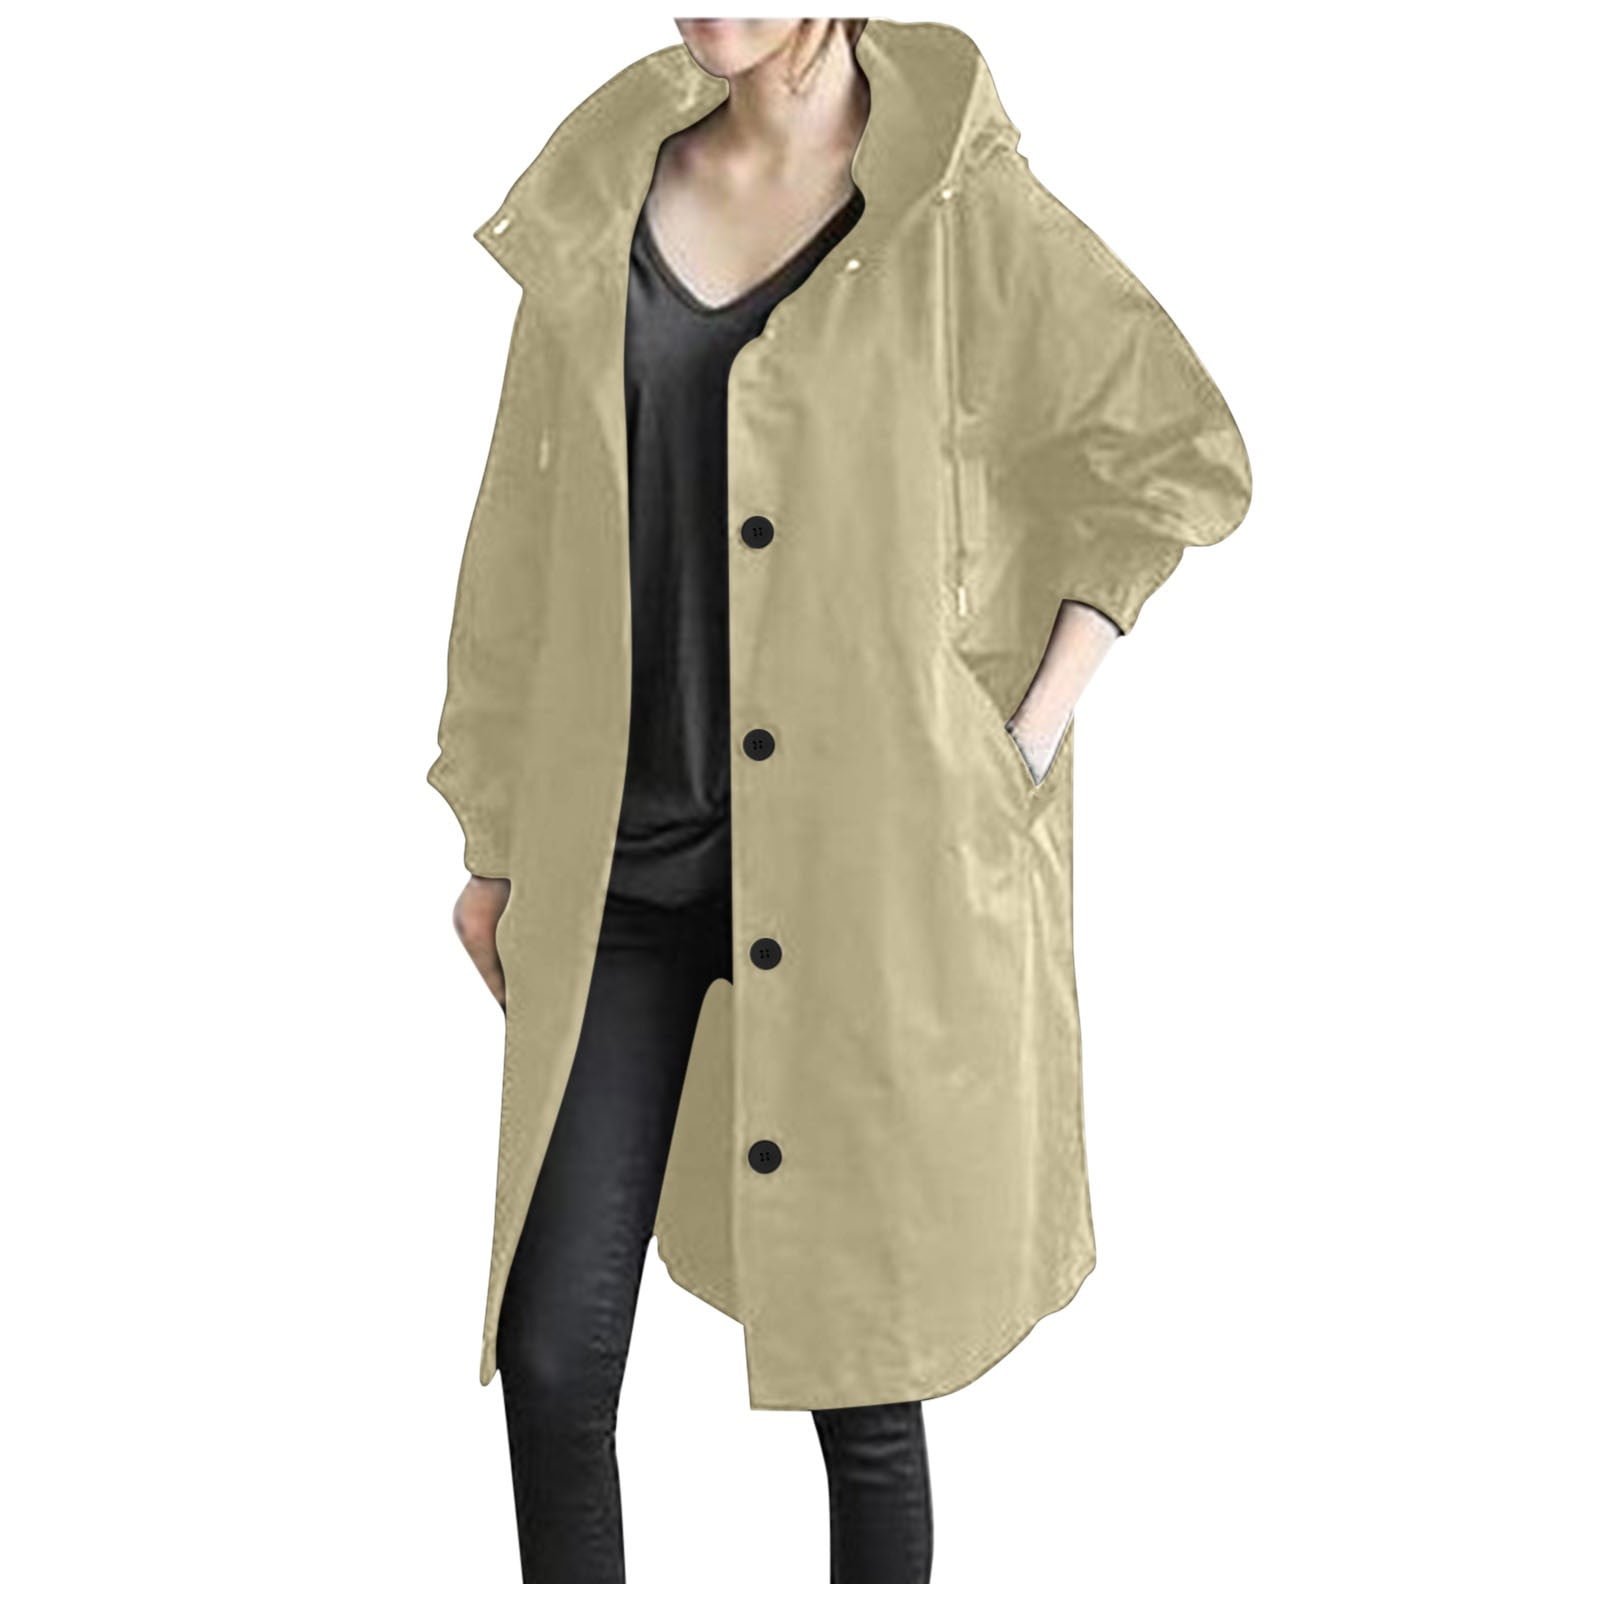 Trench Coats for Women Long Plus Size Hooded Jackets Trendy Lightweight ...